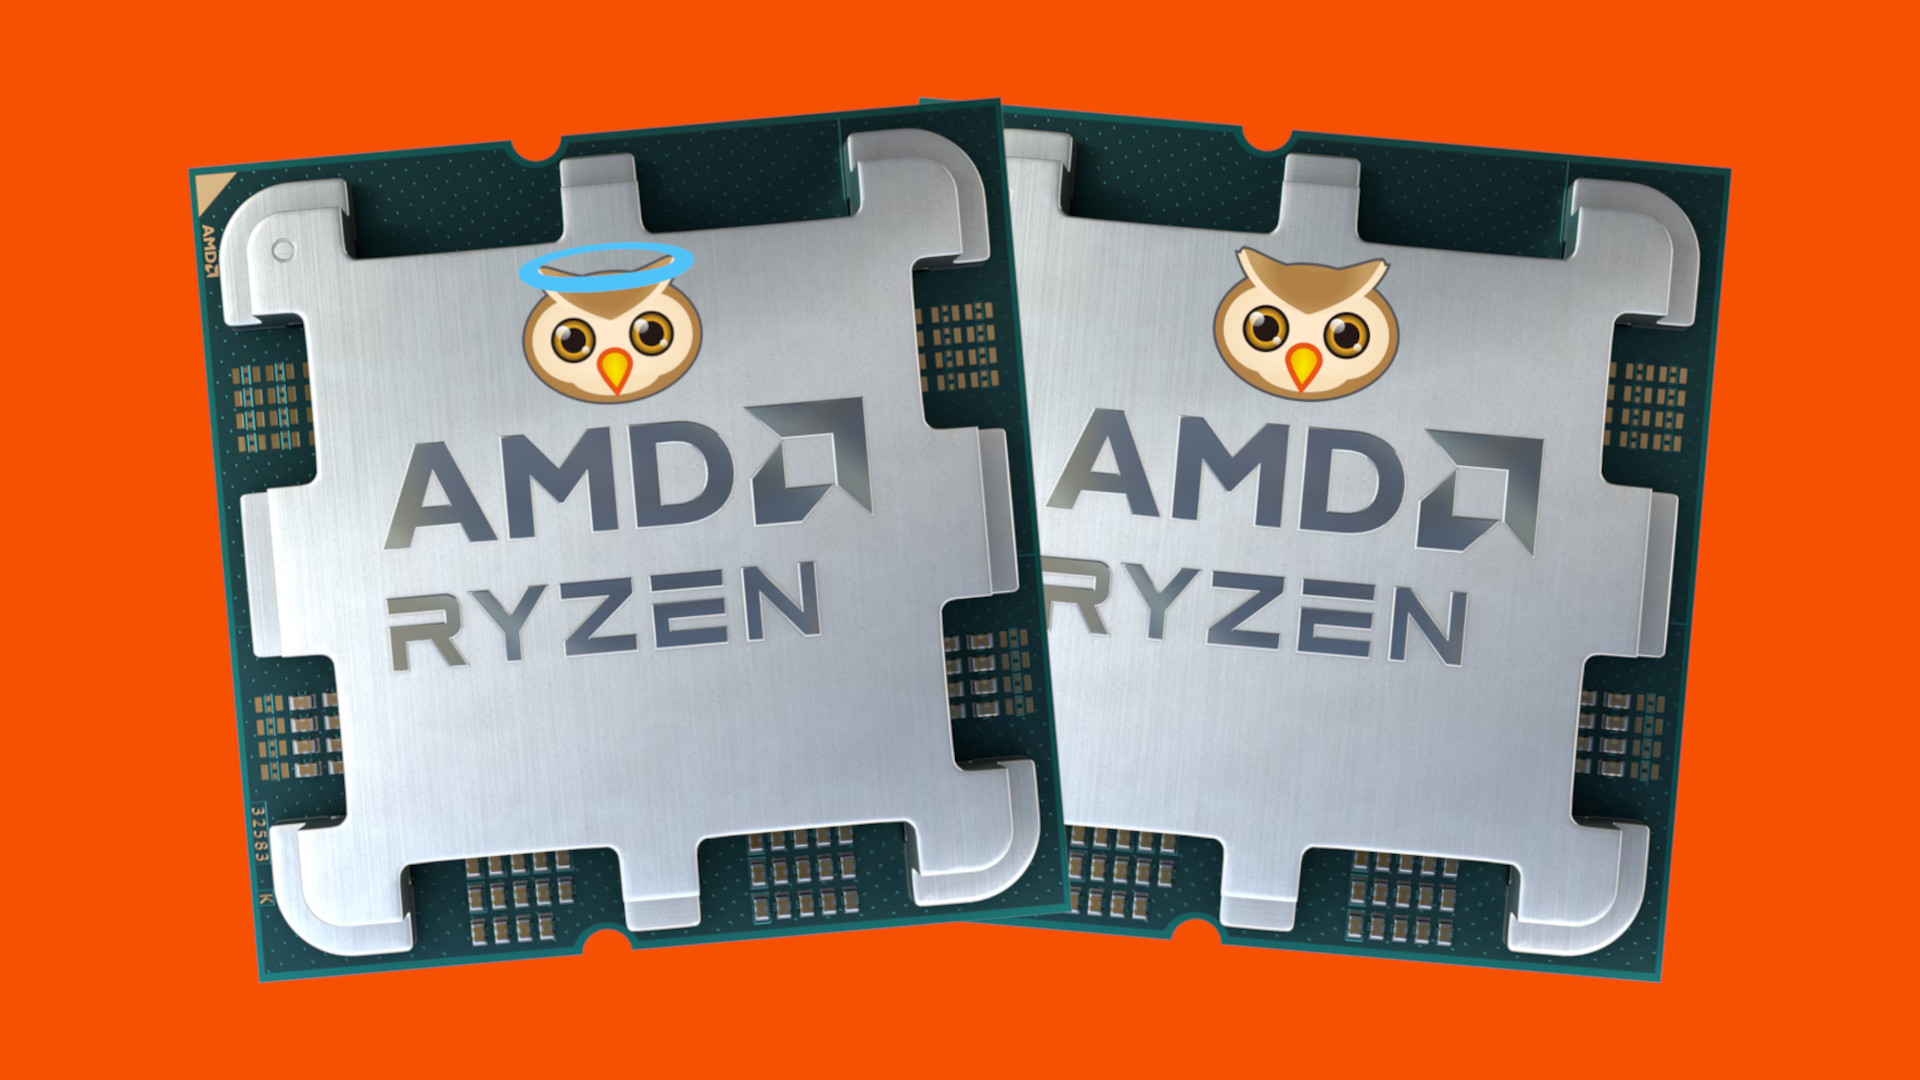 New AMD CPUs could make some graphics cards obsolete, hints specs leak